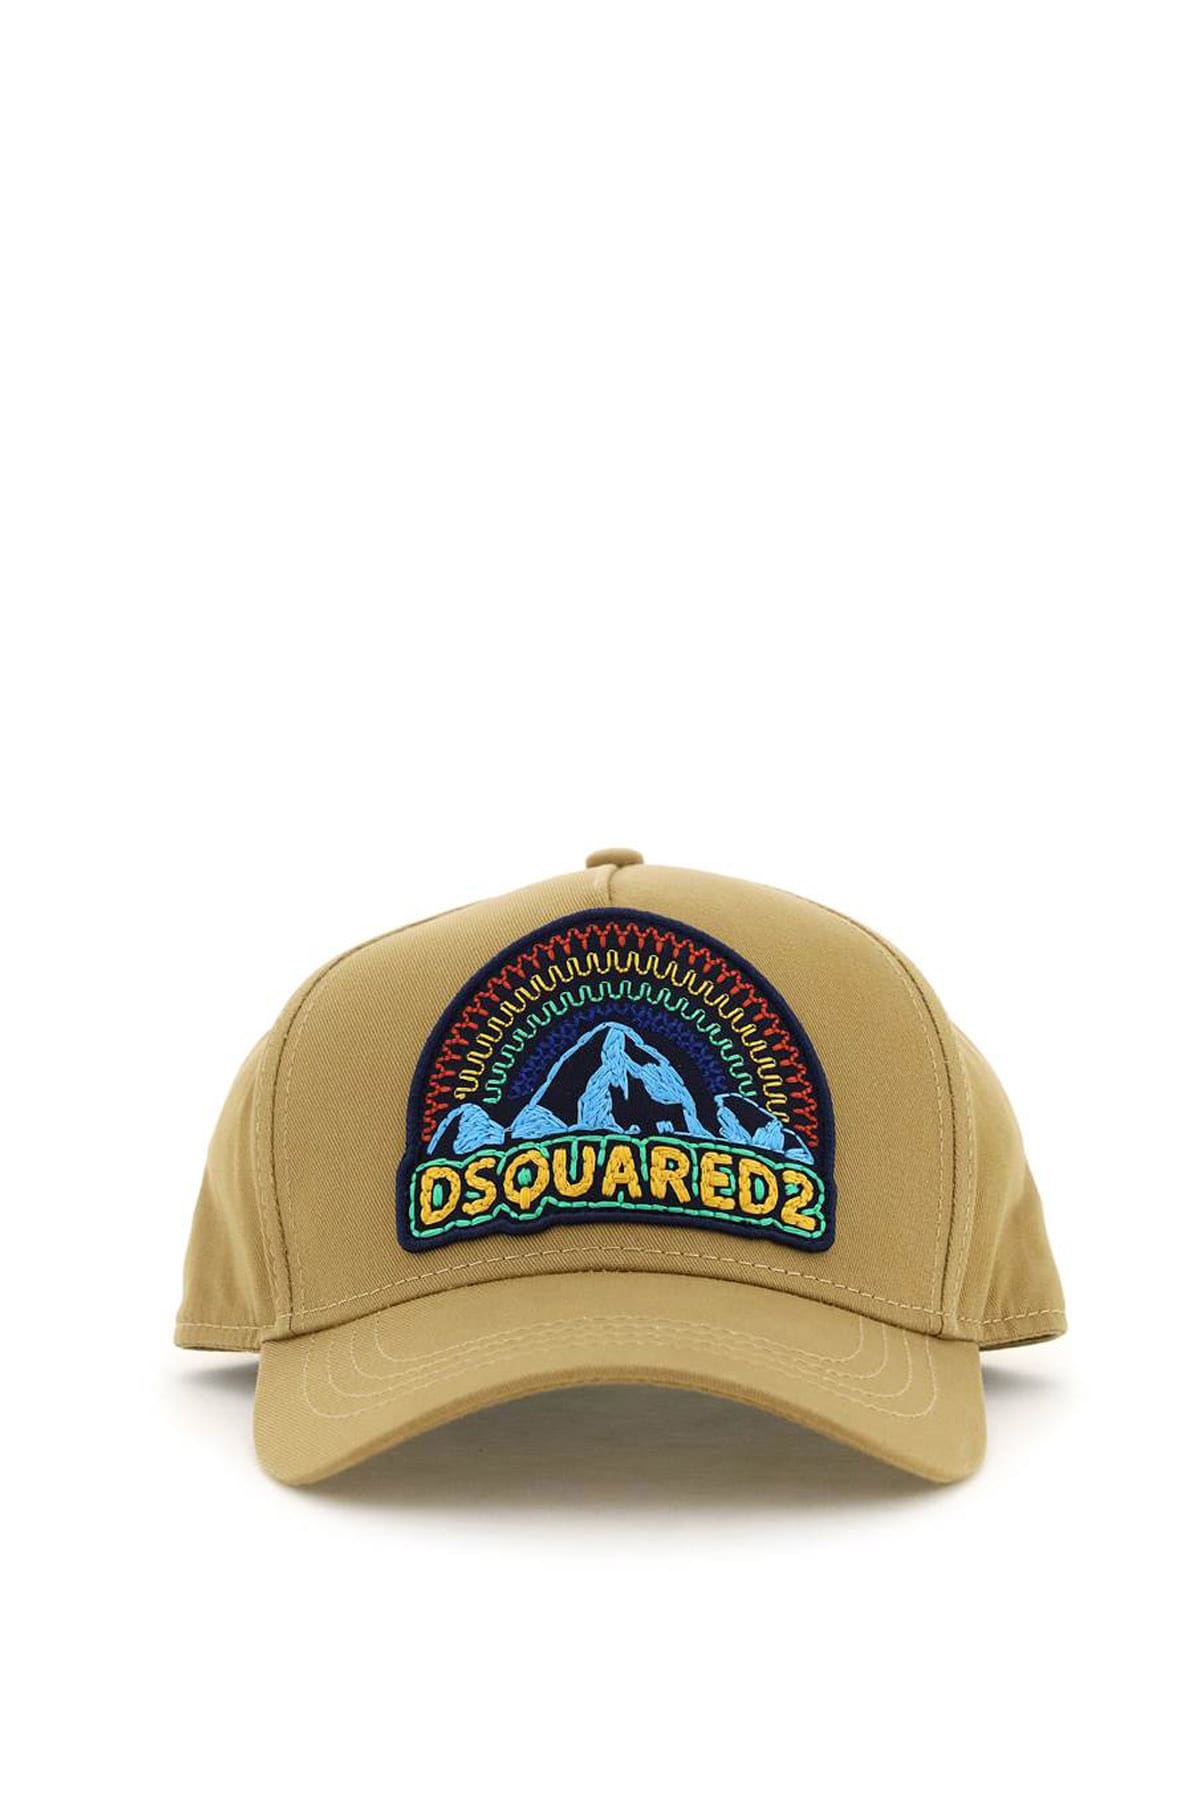 DSQUARED2 BASEBALL CAP WITH EMBROIDERED LOGO PATCH